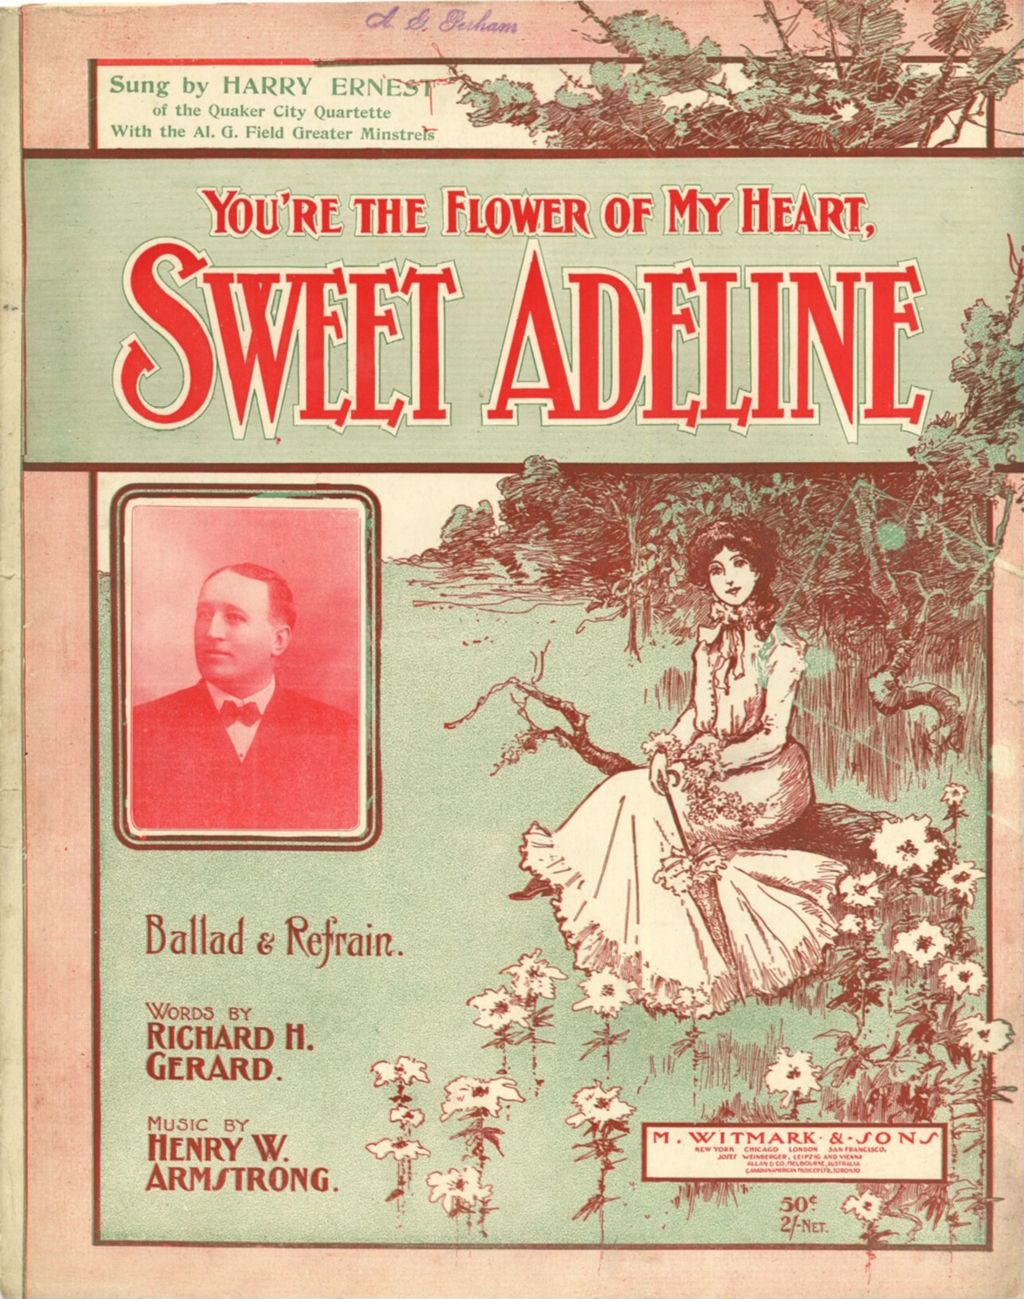 You're the Flower of My Heart, Sweet Adeline